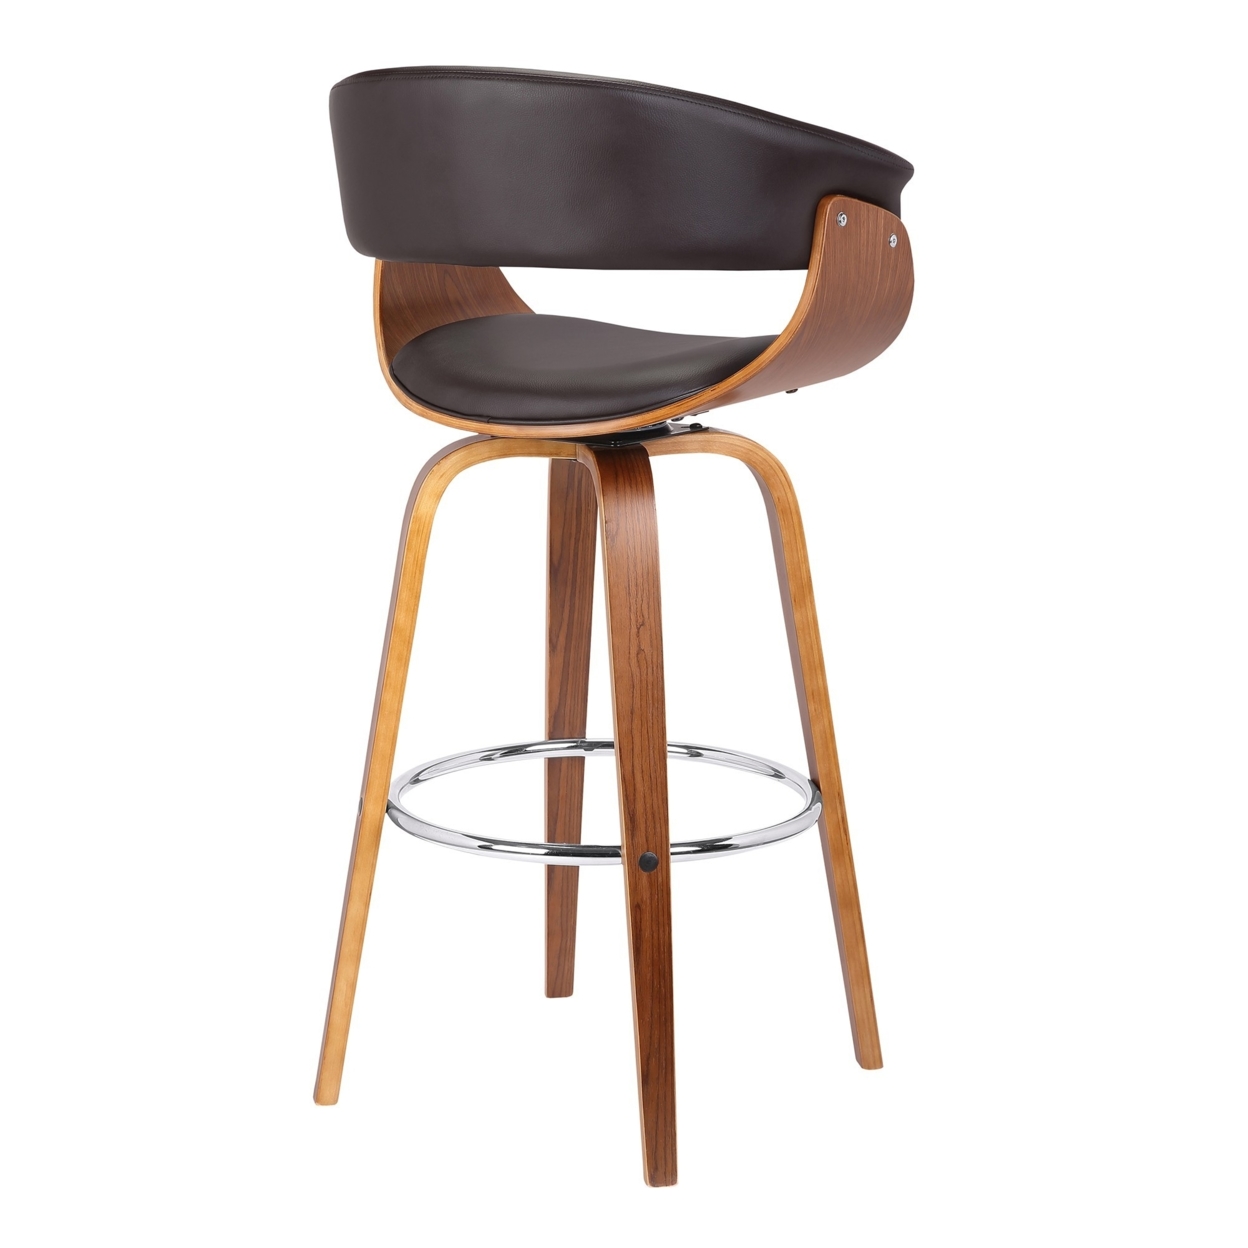 30 Inches Leatherette Swivel Barstool With Curved Design Seat, Brown- Saltoro Sherpi